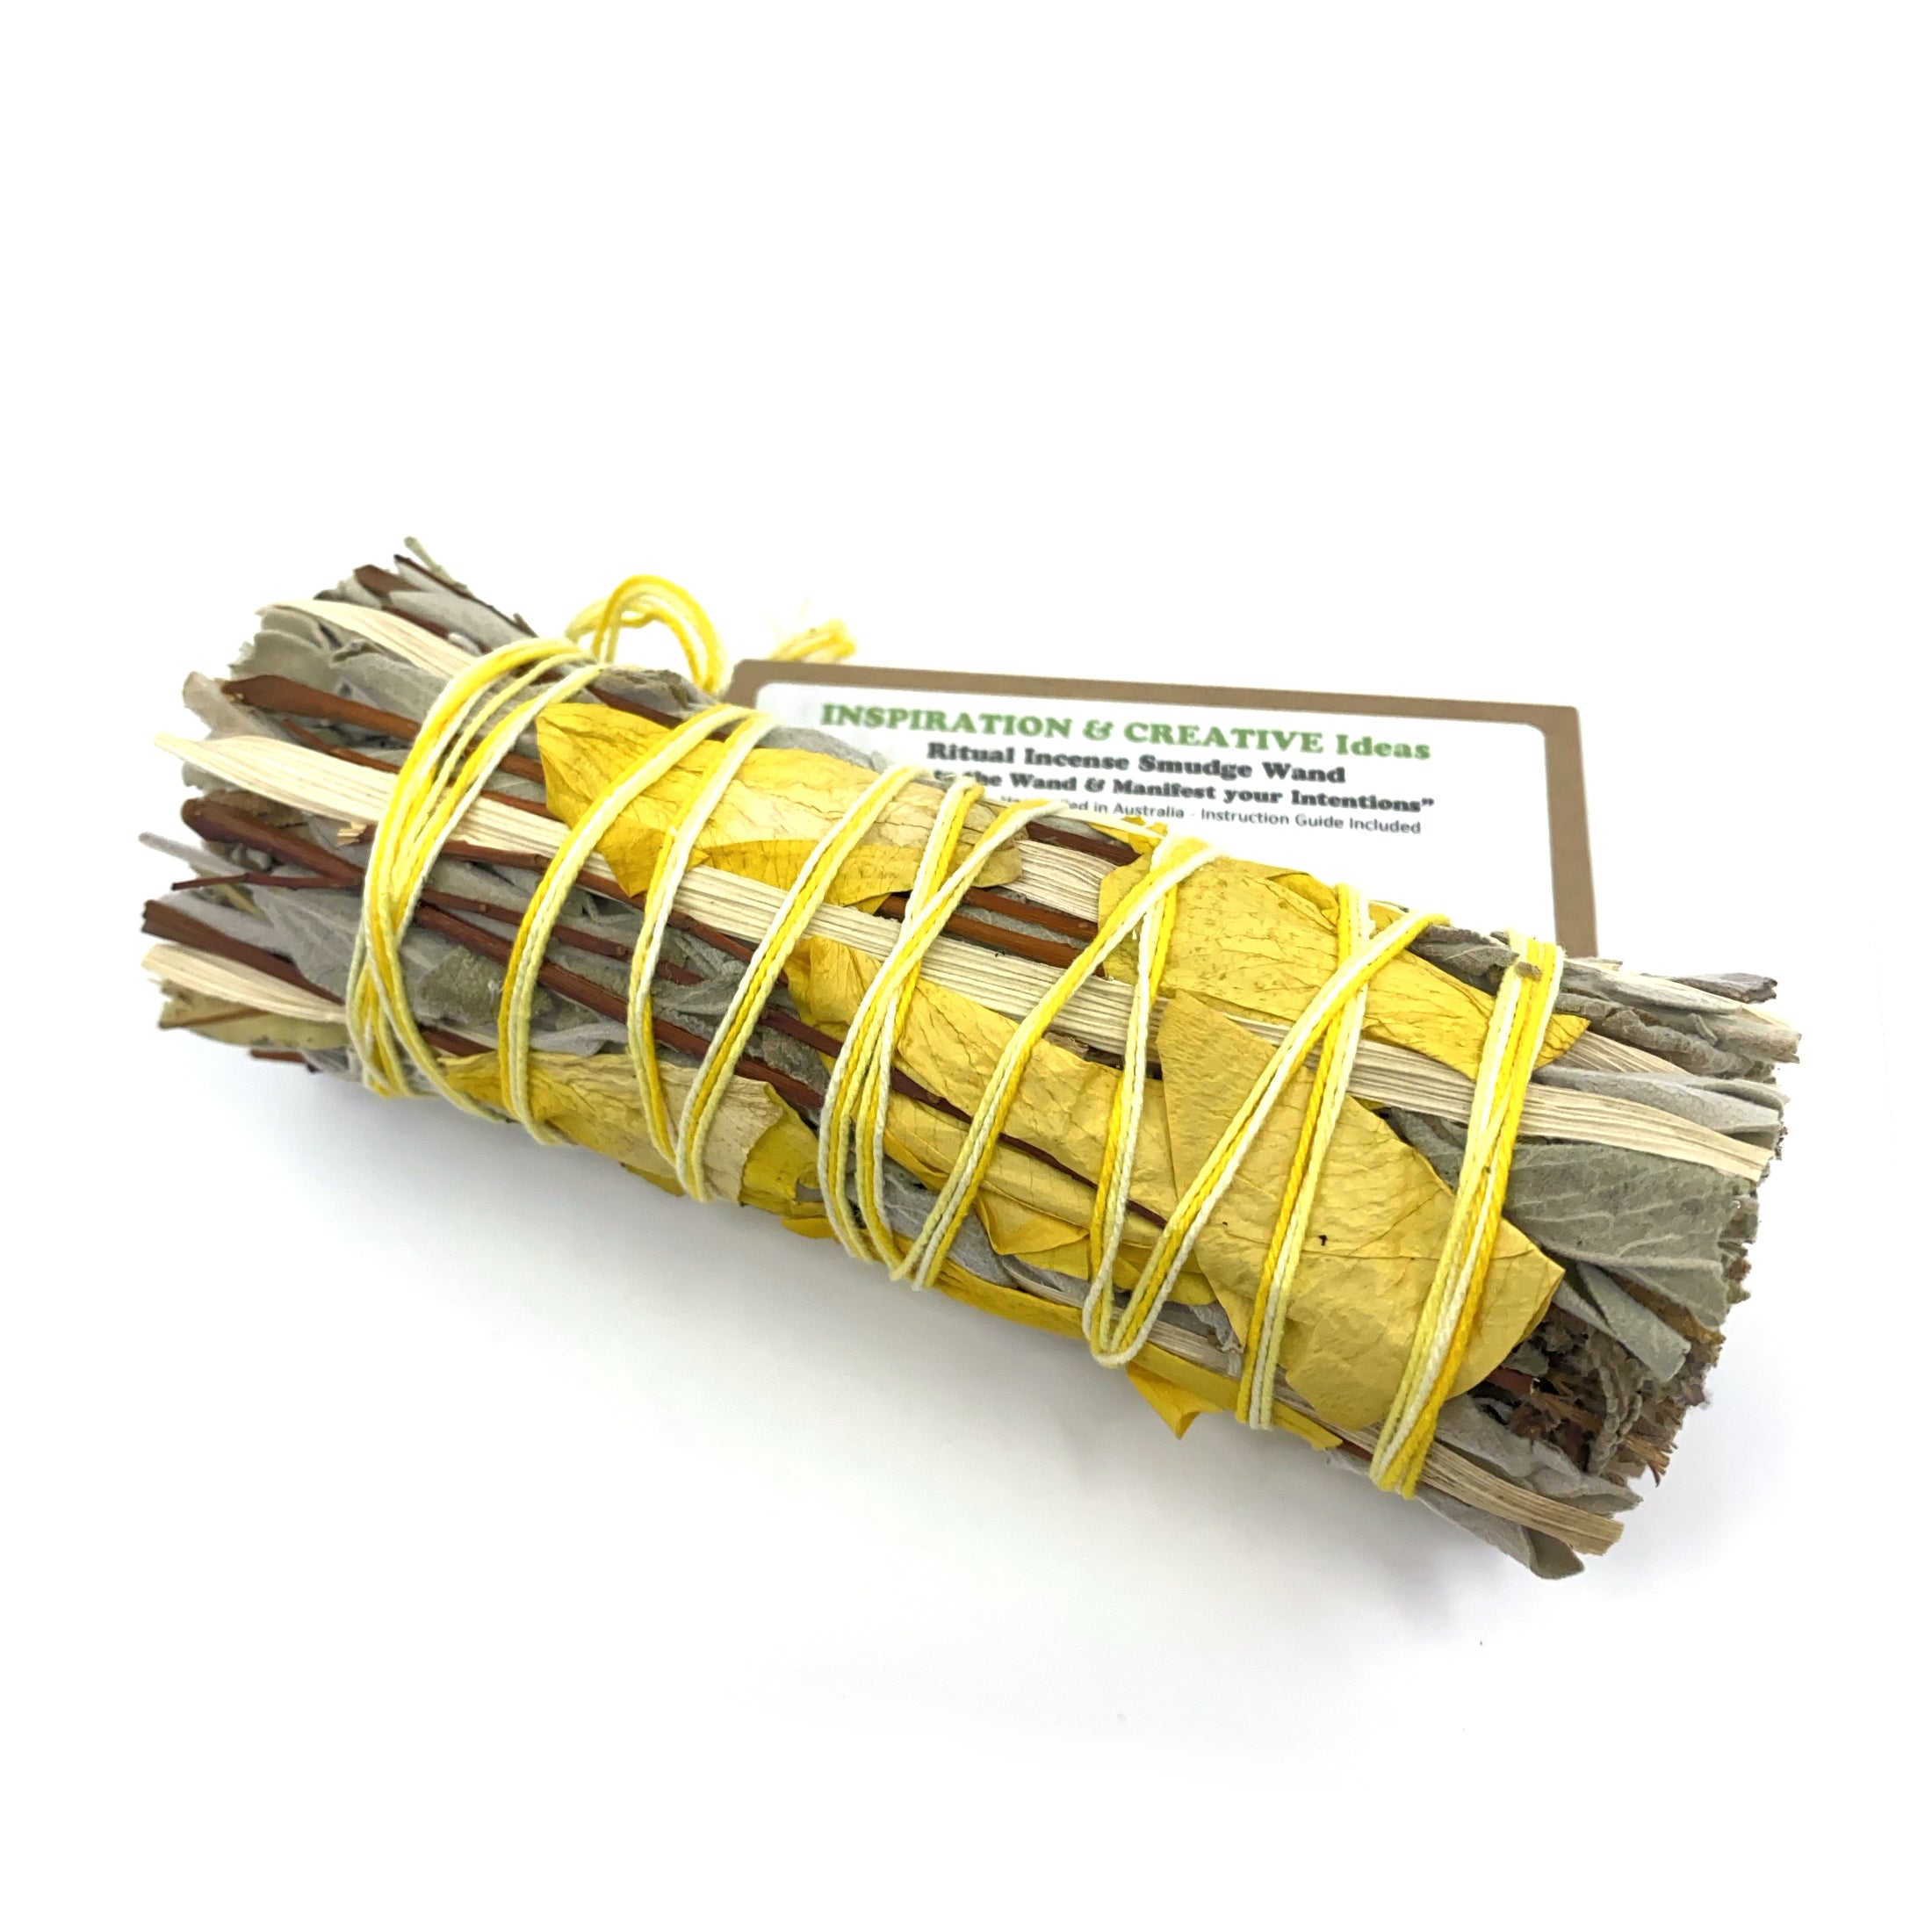 Inspiration & Creative Ideas - With Good Intentions Smudge Stick